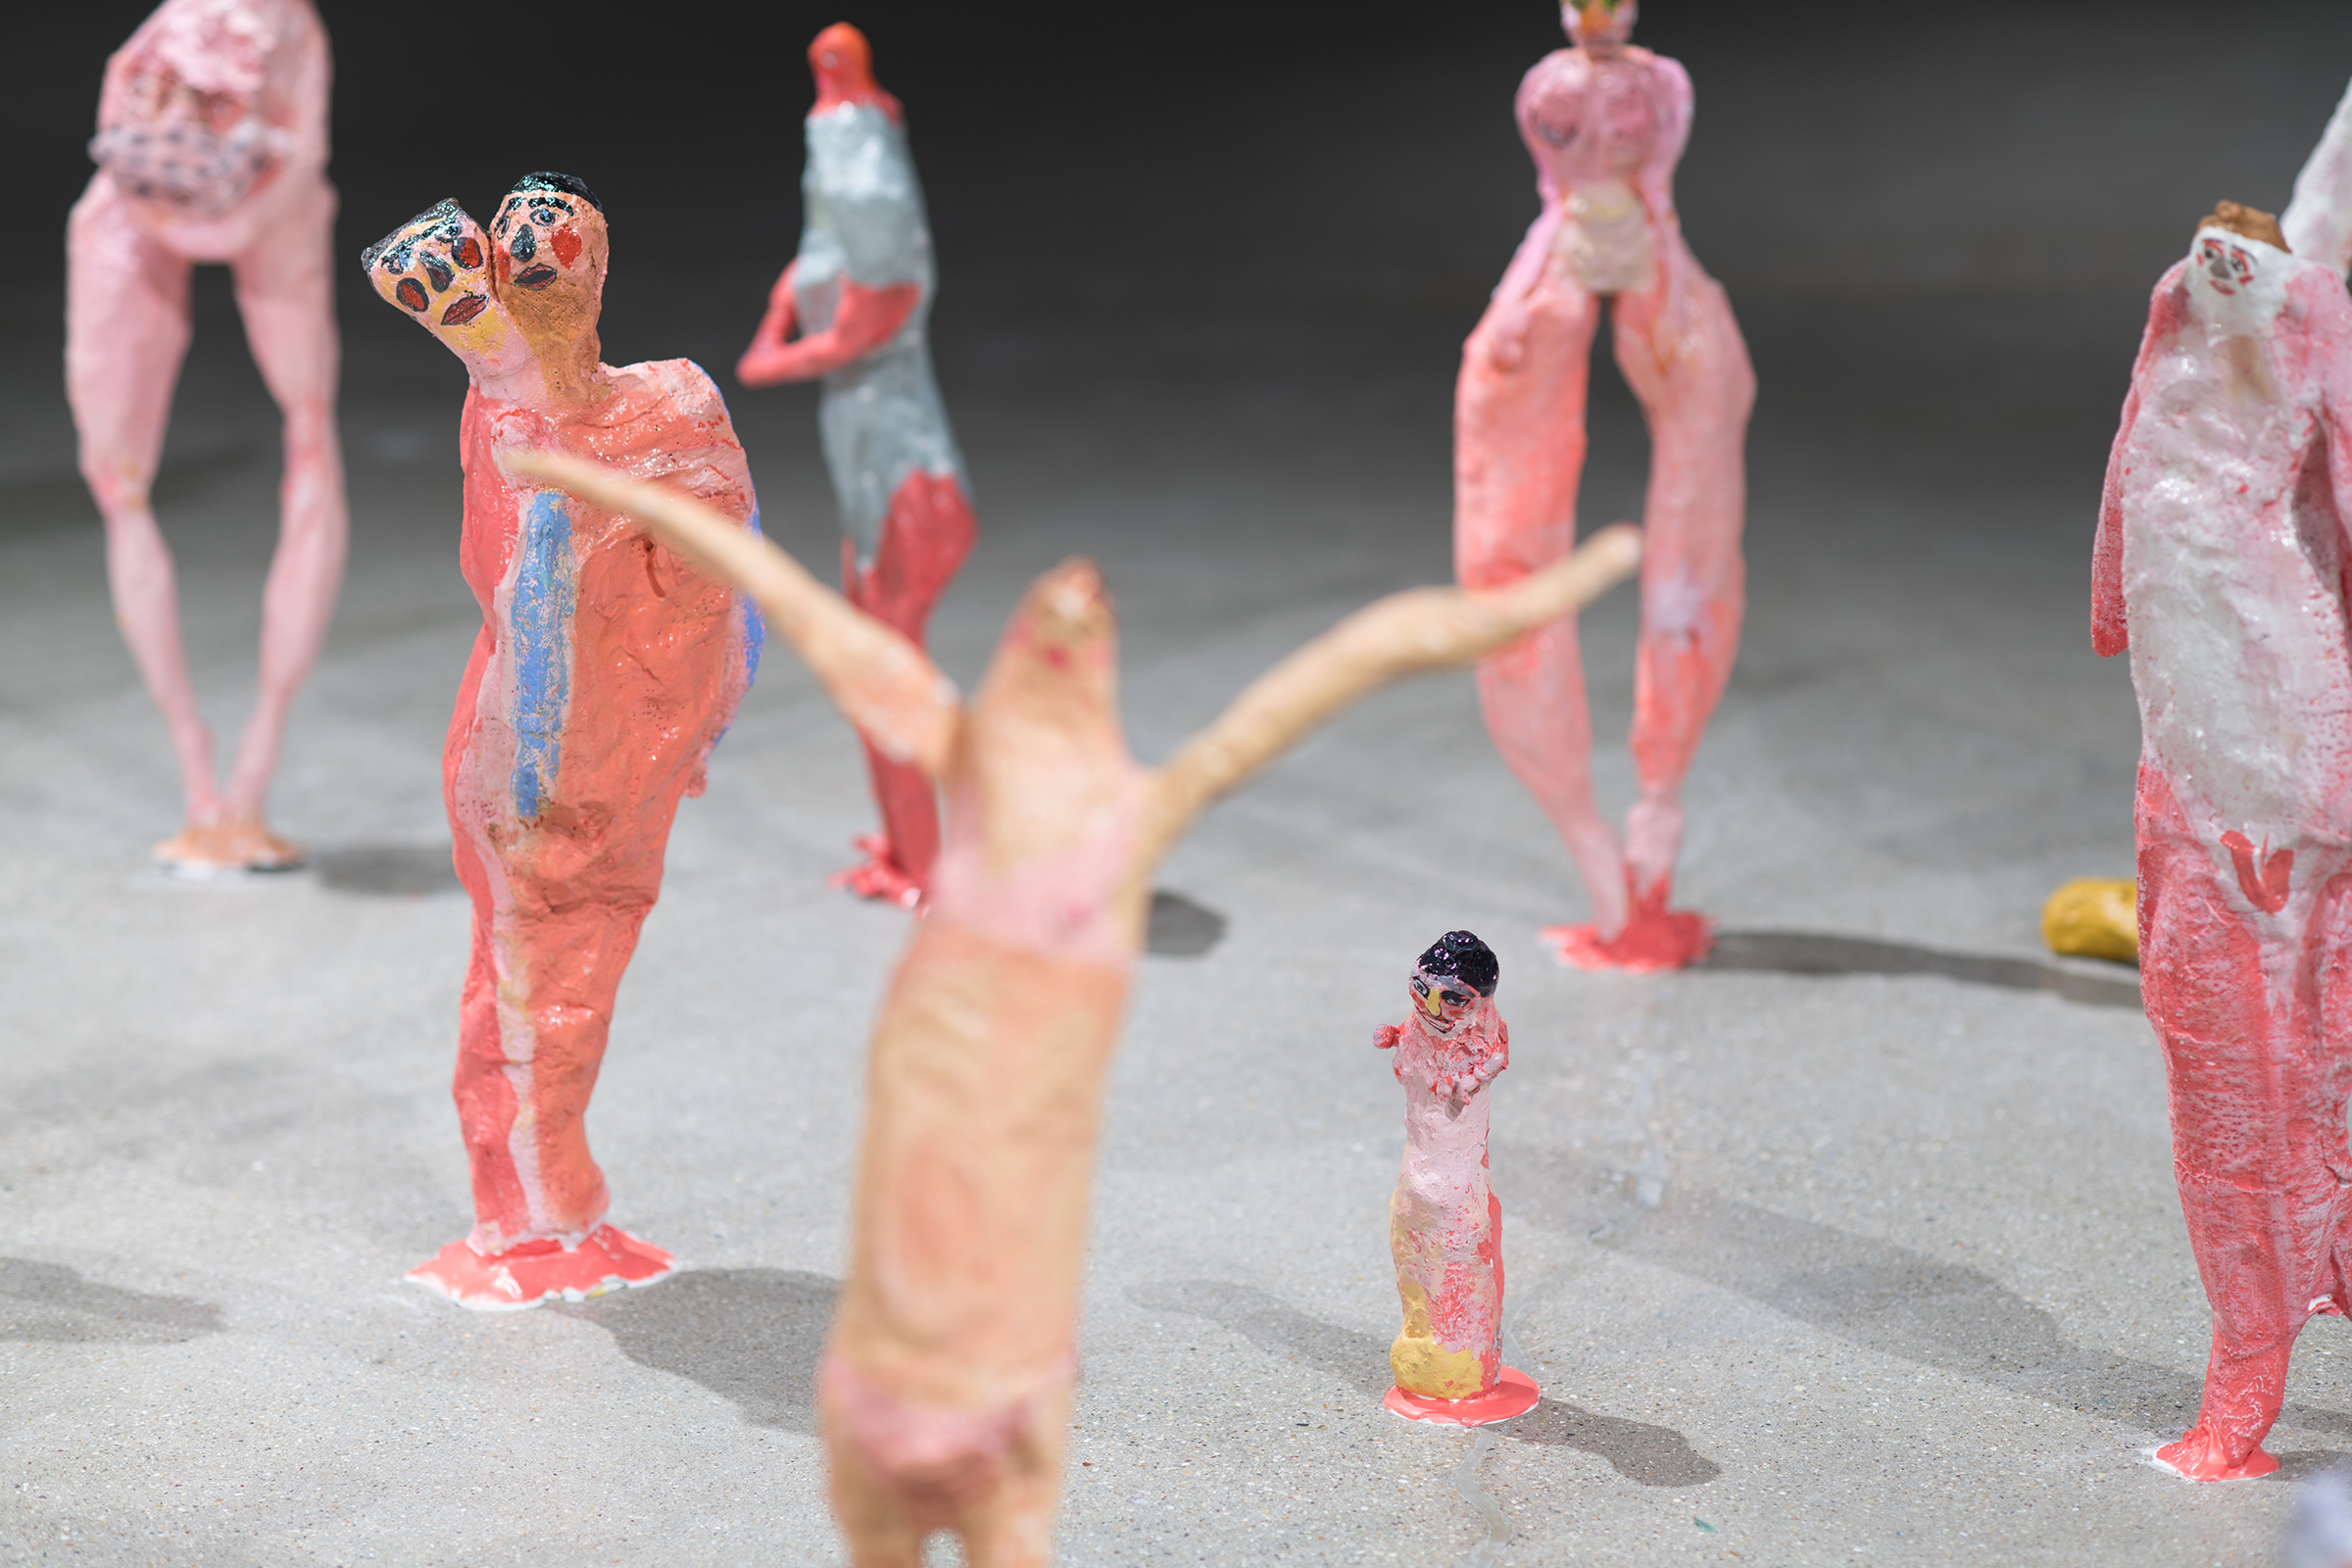 My little dolls detail, mixed-media sculptures by Ashley Lusietto. Photography by Kyle Herrera.